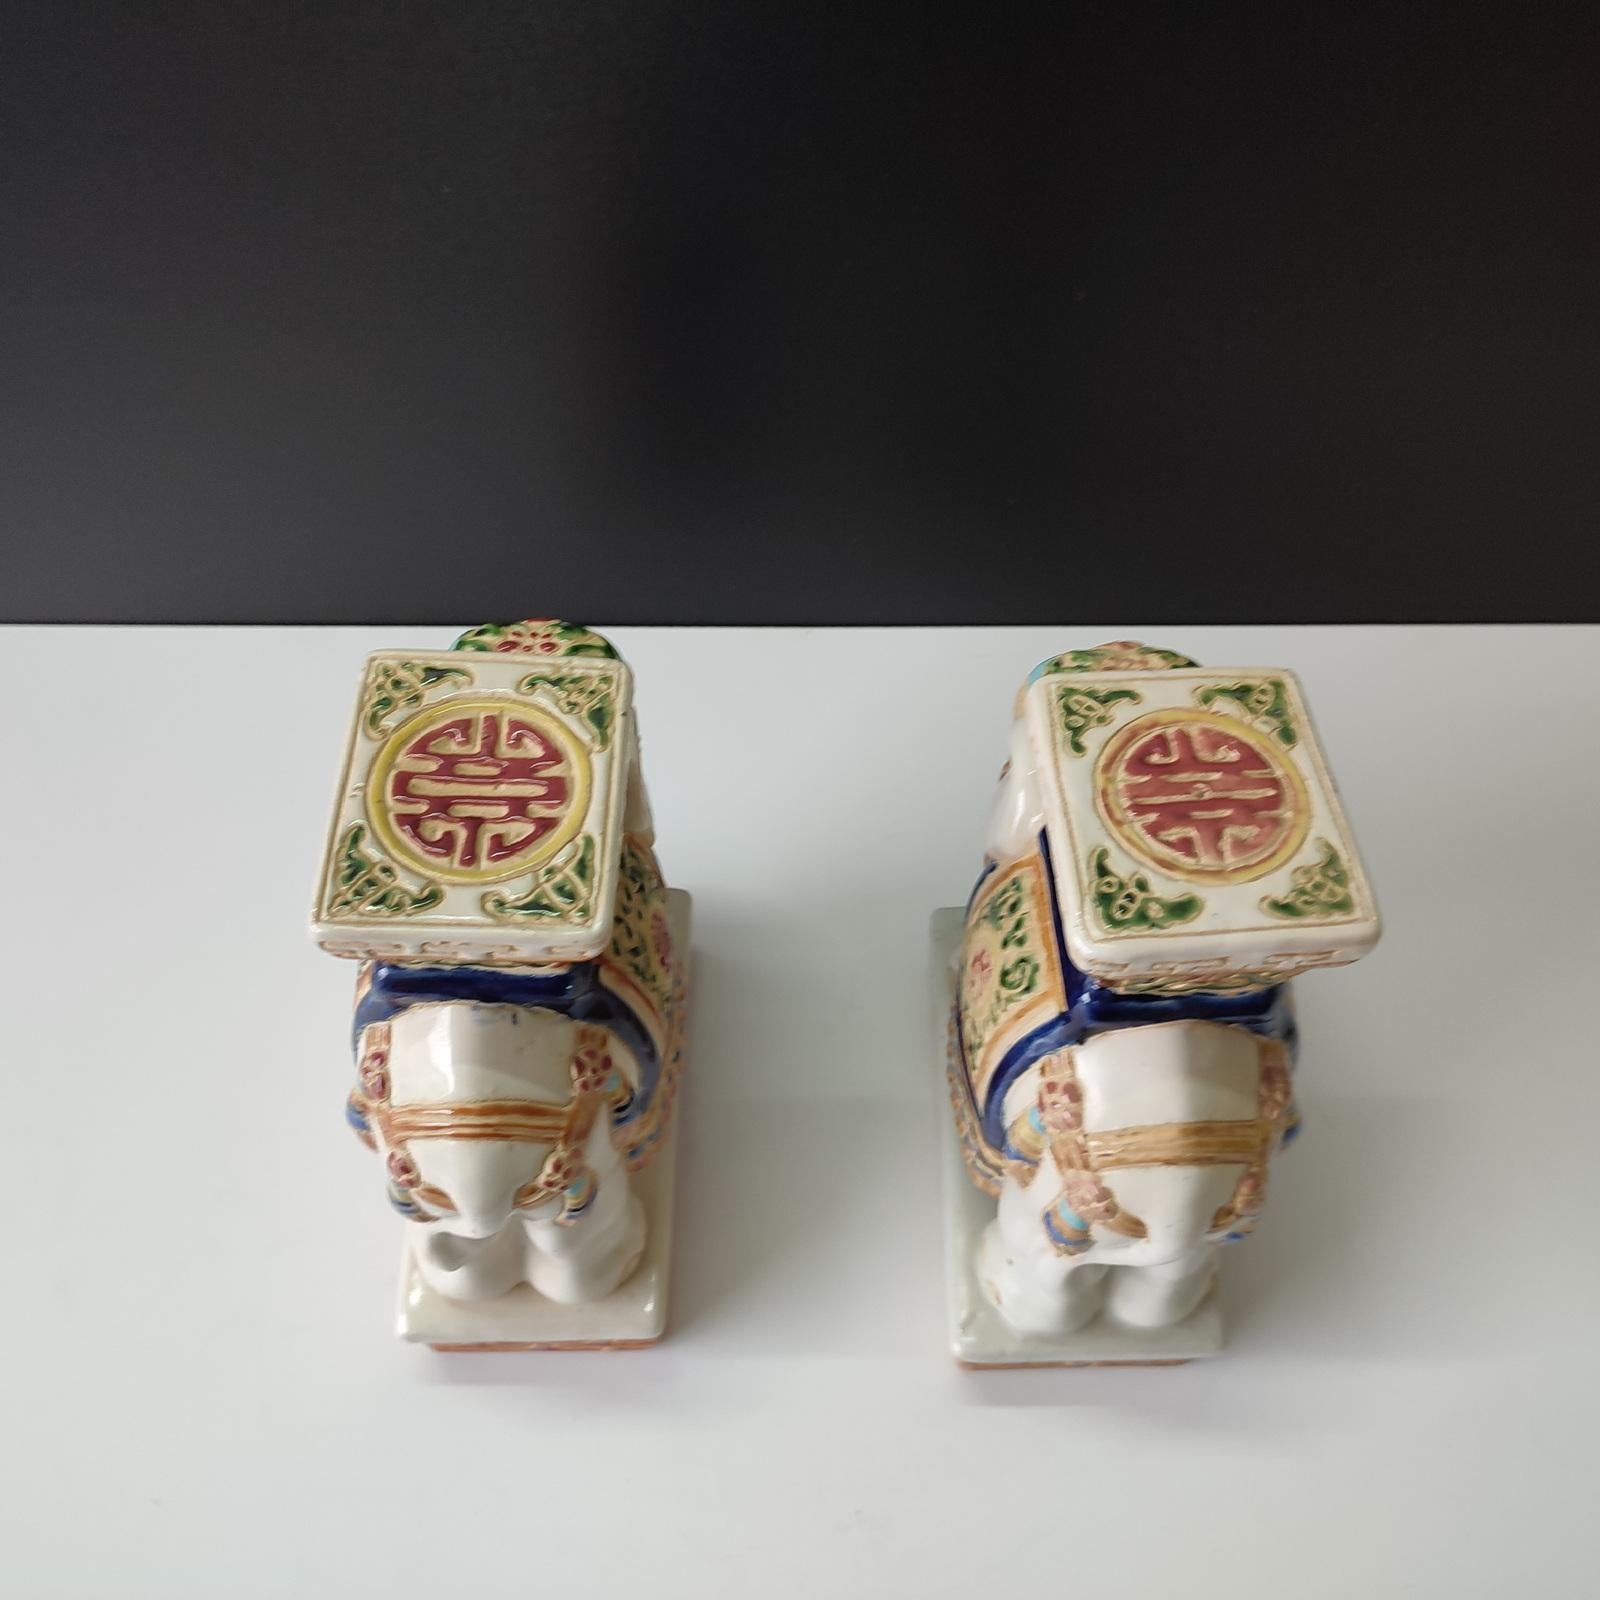 Pair of Polychrome Ceramic Elephant Plant Holder, Bookends, Mid 20th Century For Sale 2